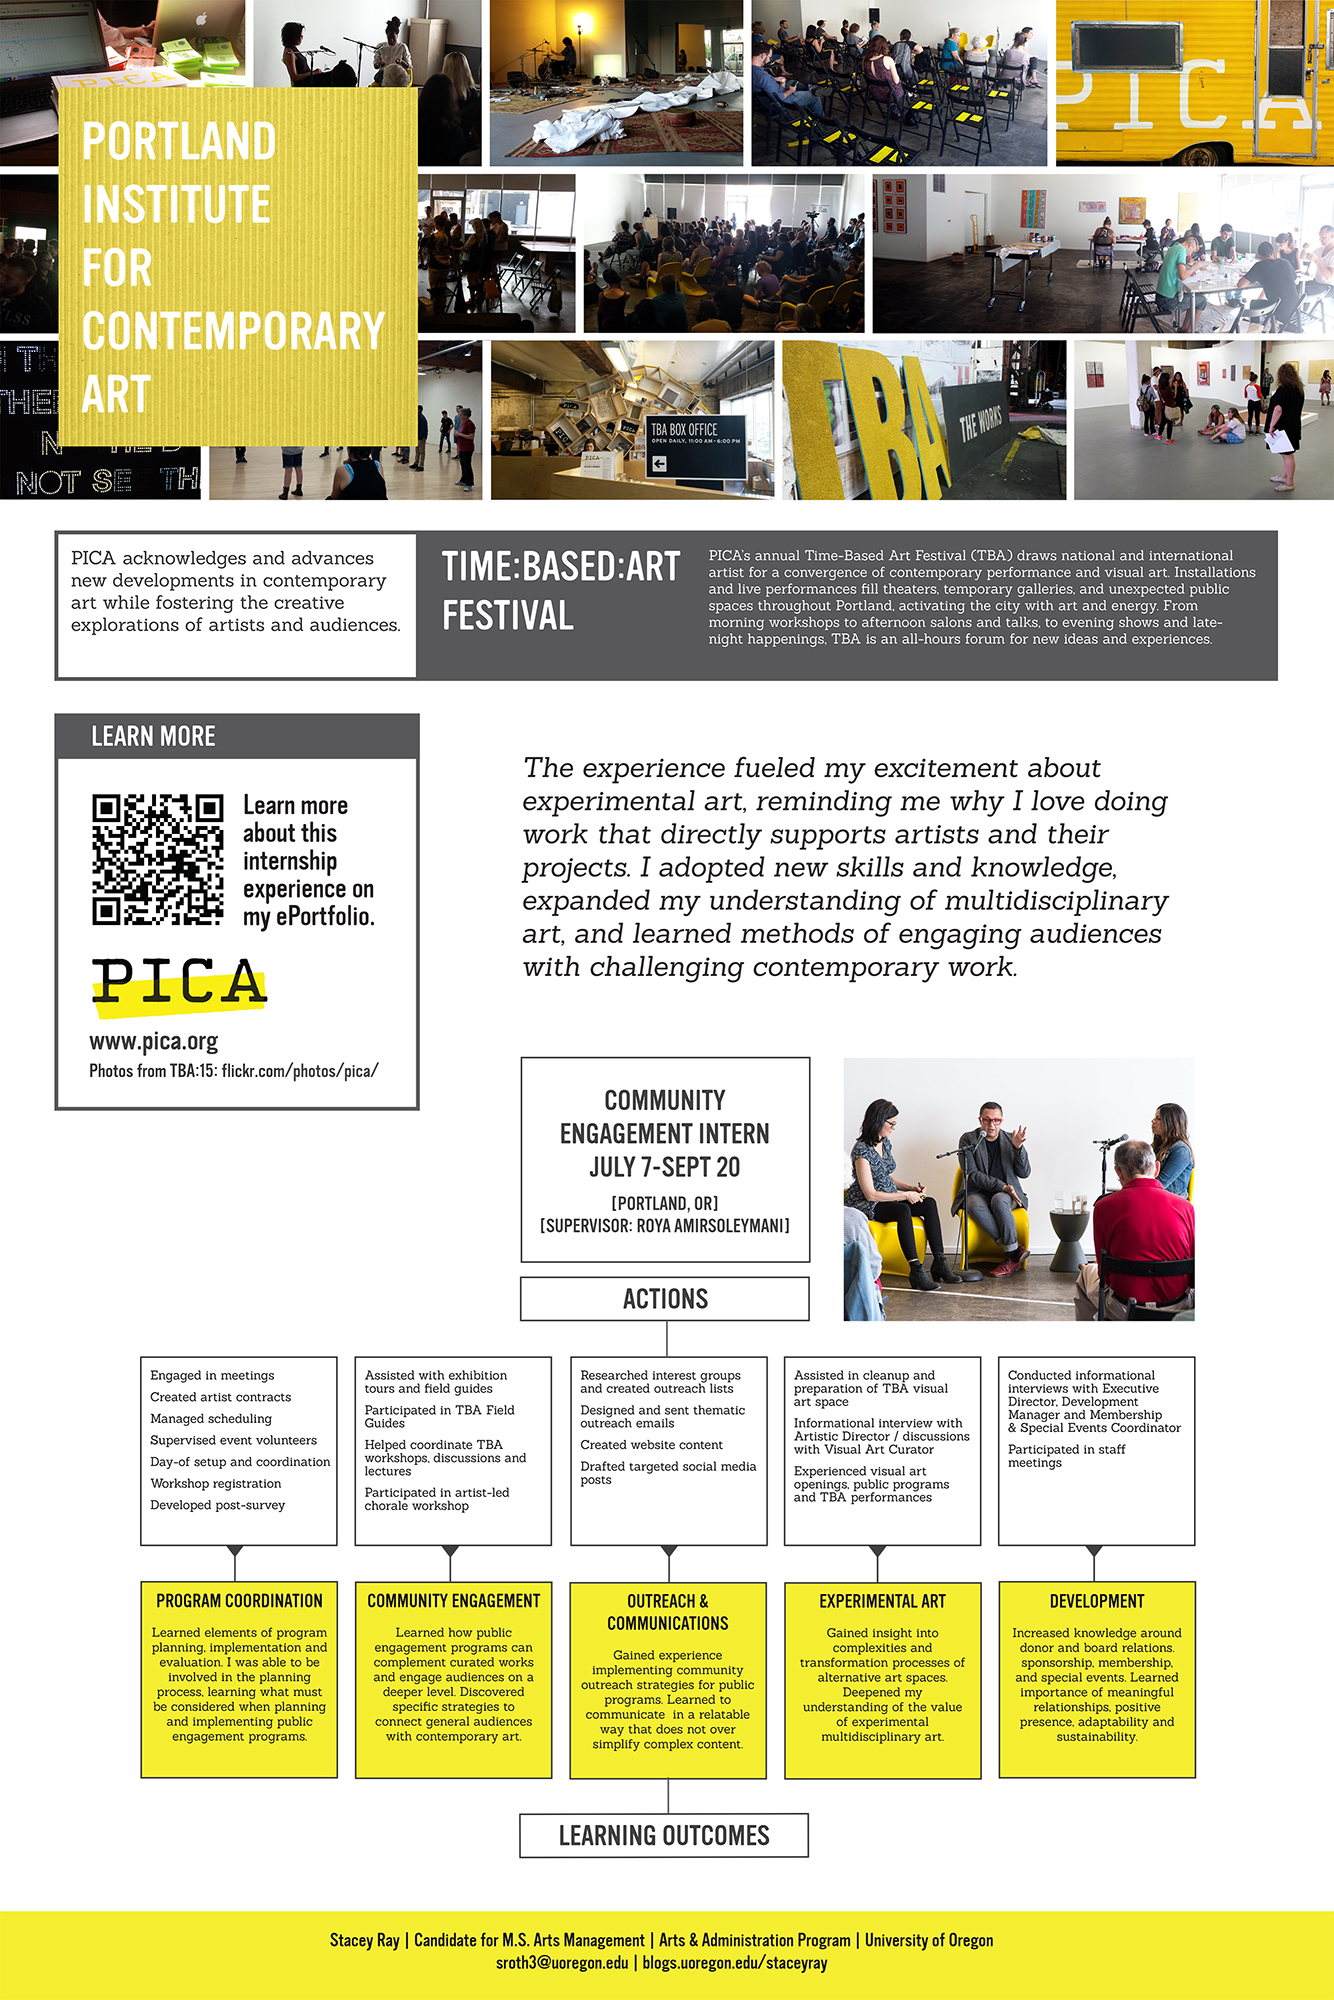 PICA_Internship Poster_Stacey Ray_sm